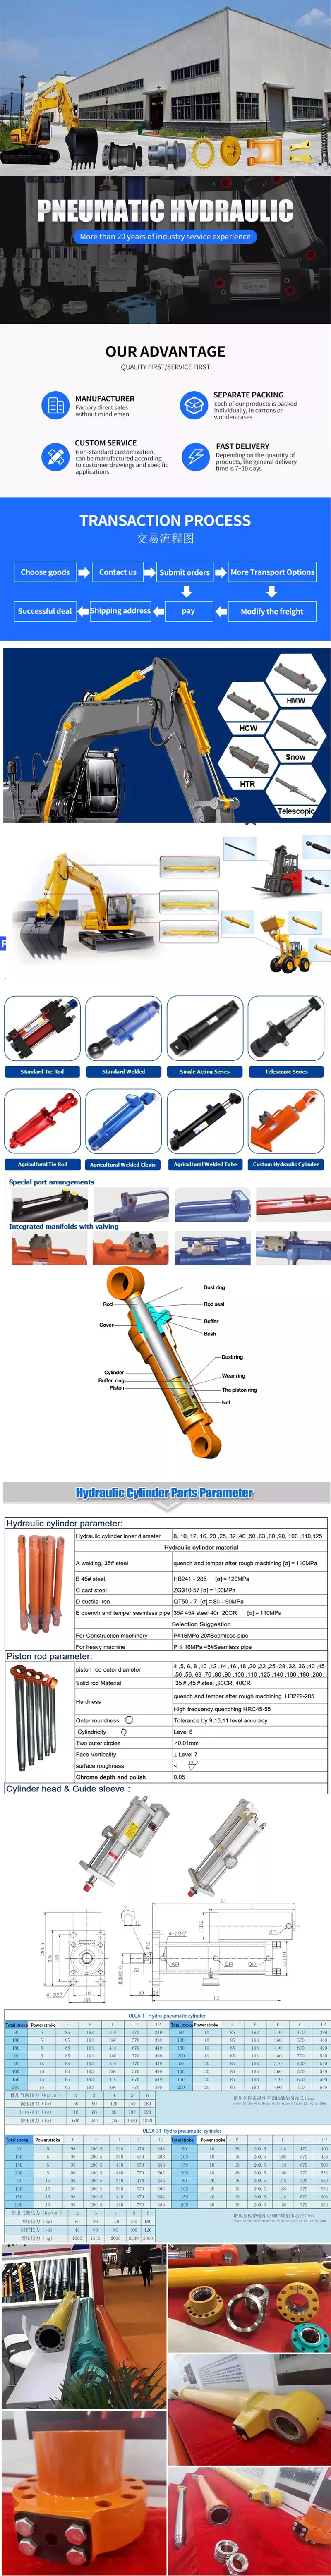 China Custom Mini Double Acting CZPT Hydraulic Oil Cylinders for Farm Tractor Backhoe Loader with Hydraulic RAM Power Jack   wholesaler 